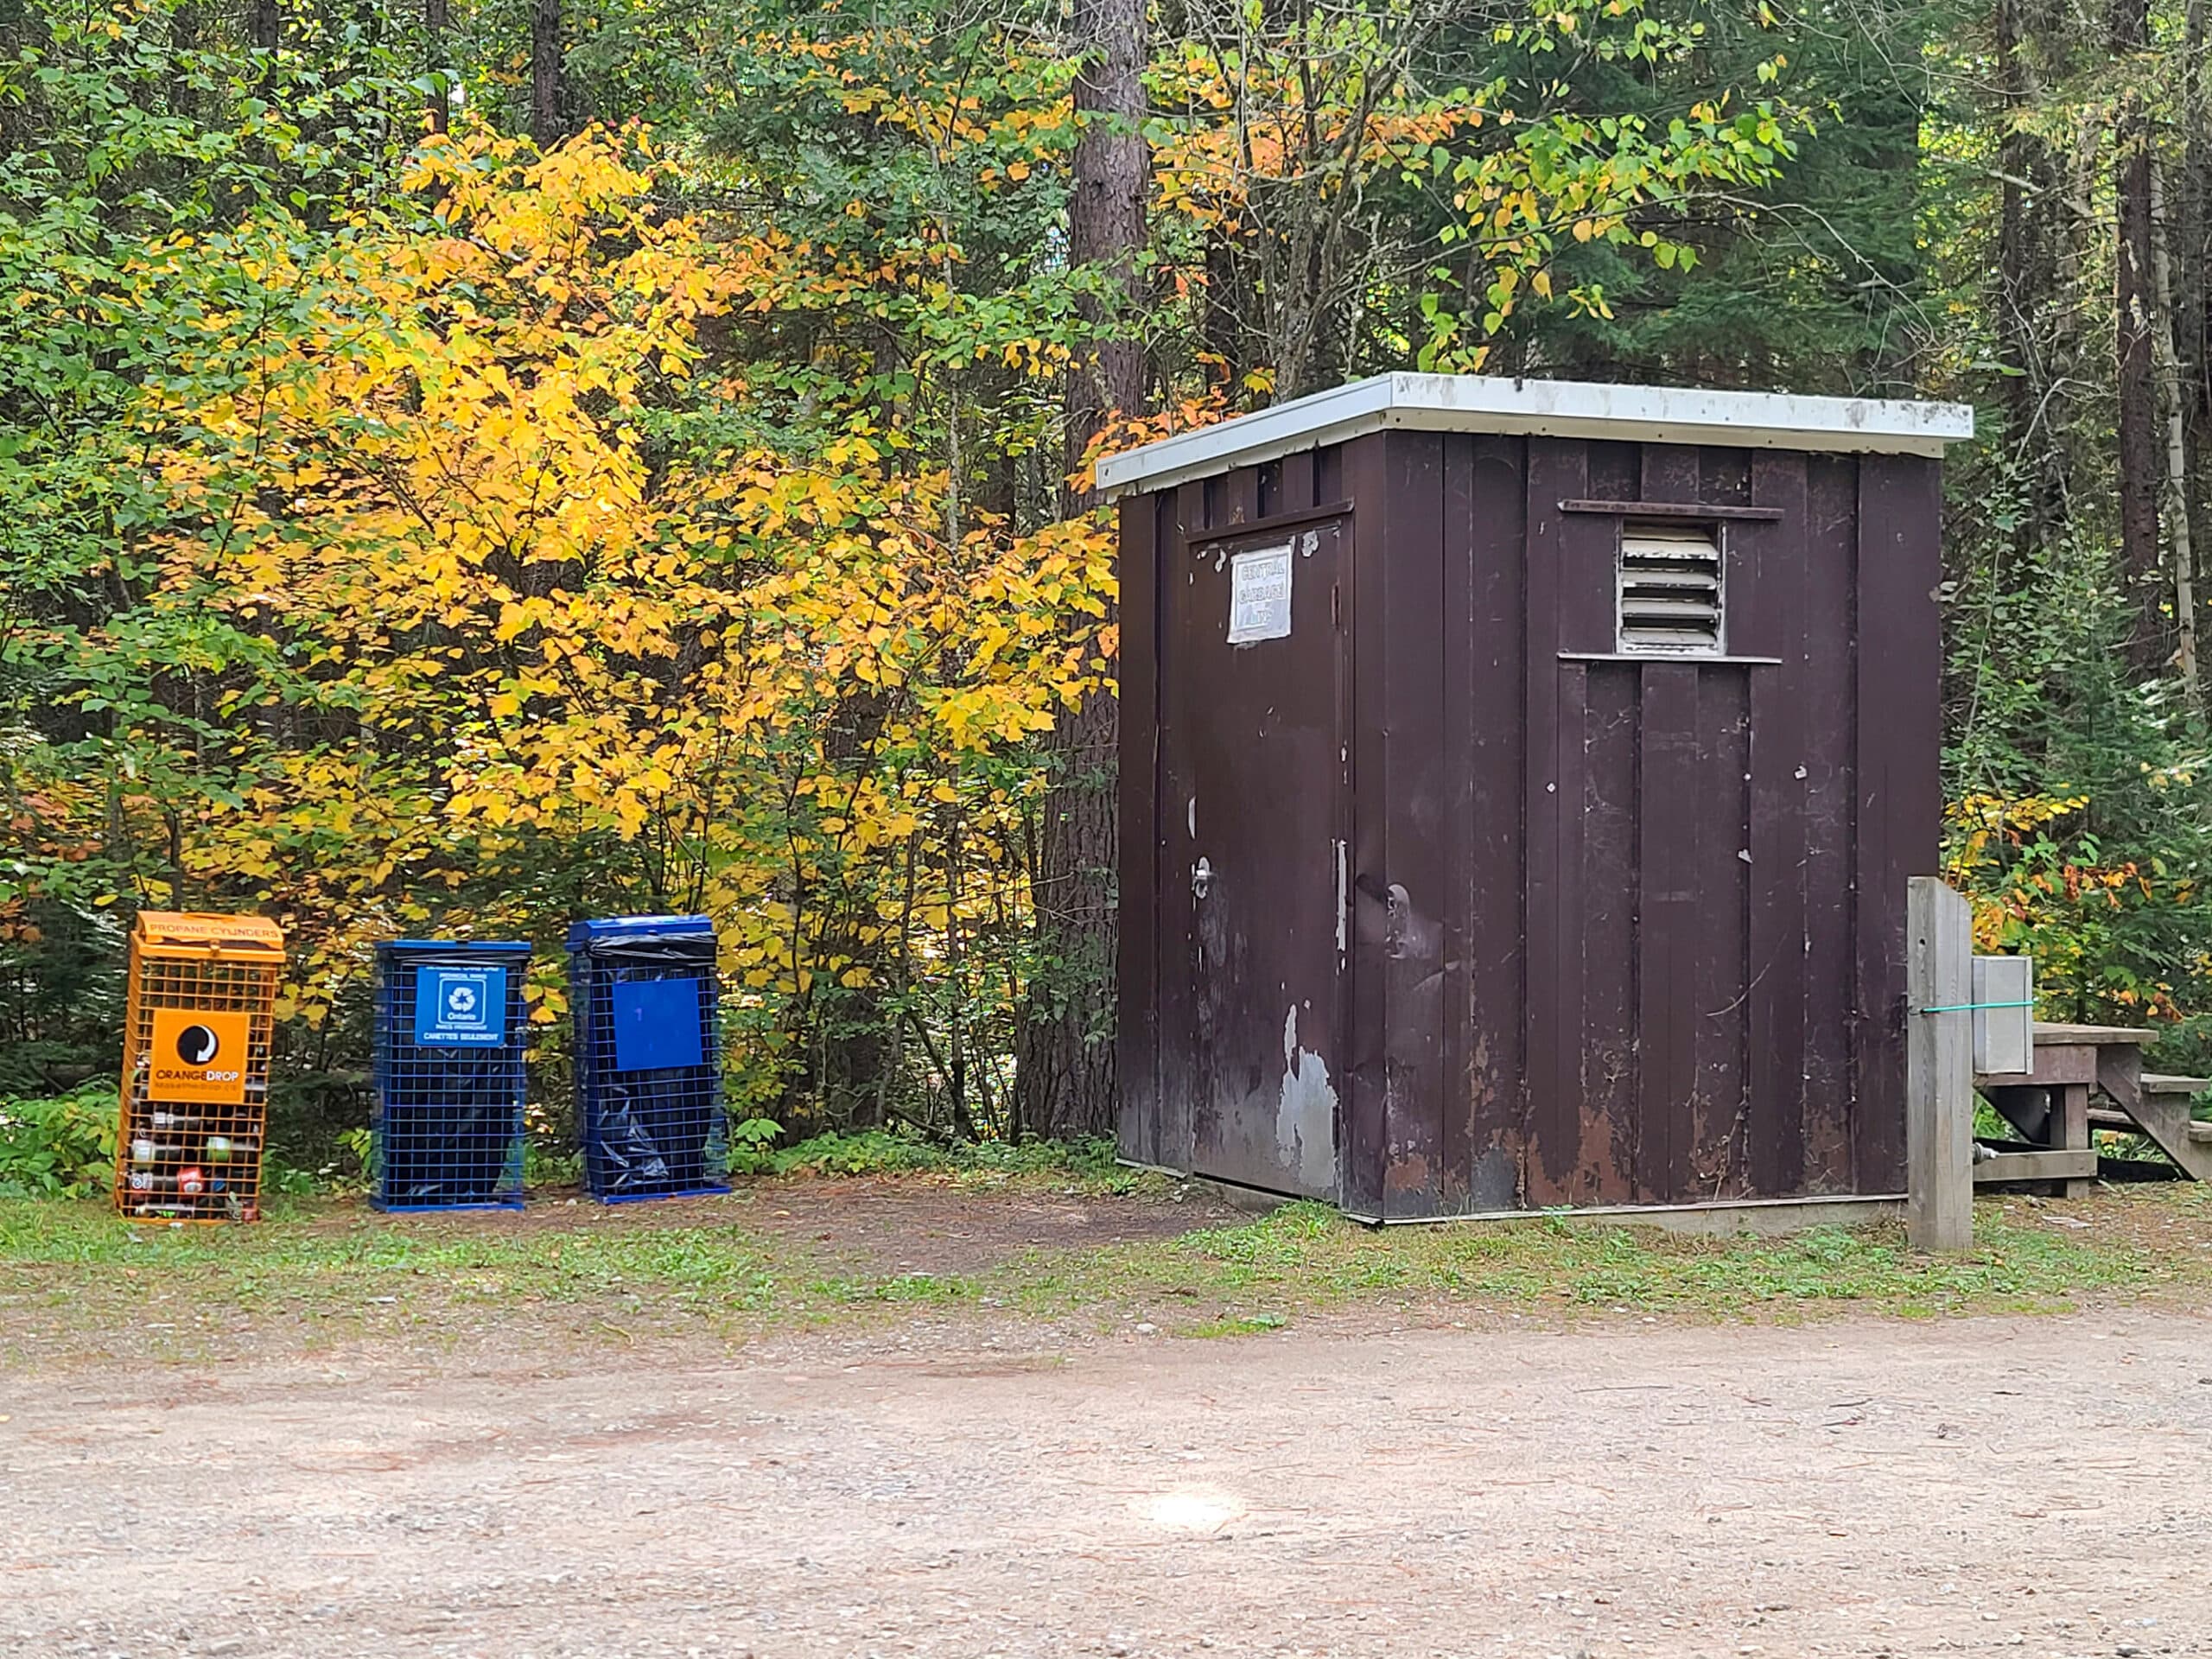 A brown hut for garbage, with 2 smaller recycling bins next to it.